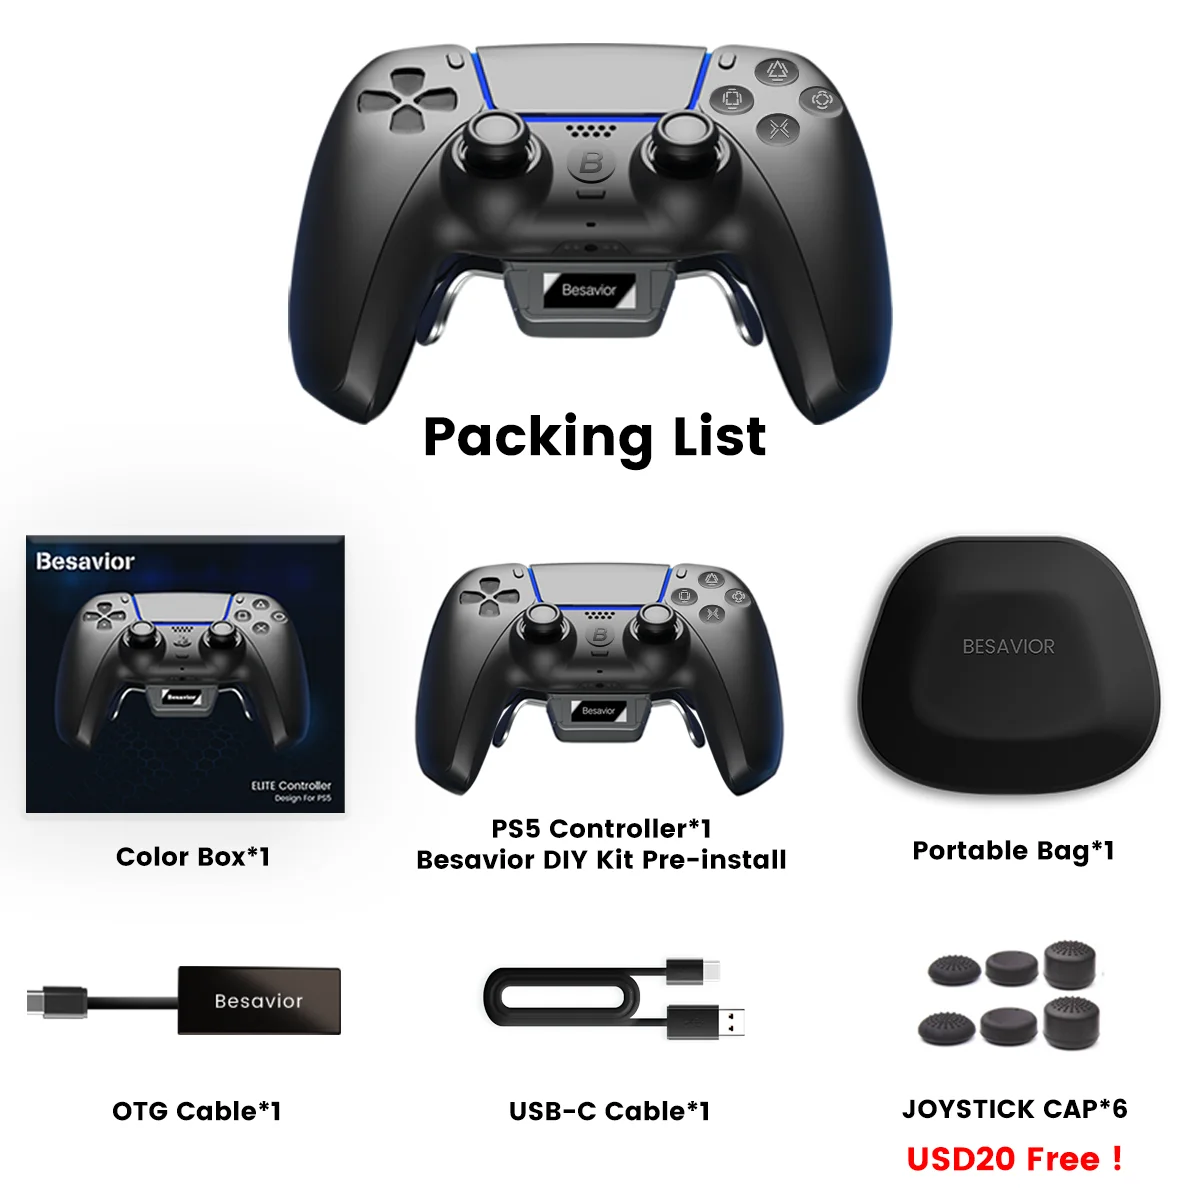 Besavior P5 Expandable Elite Controller Bt Gamepad A Variety Of Game  Peripherals For Ps5 - Buy Bt Controller,Wireless Controller For  Ps5,Computer